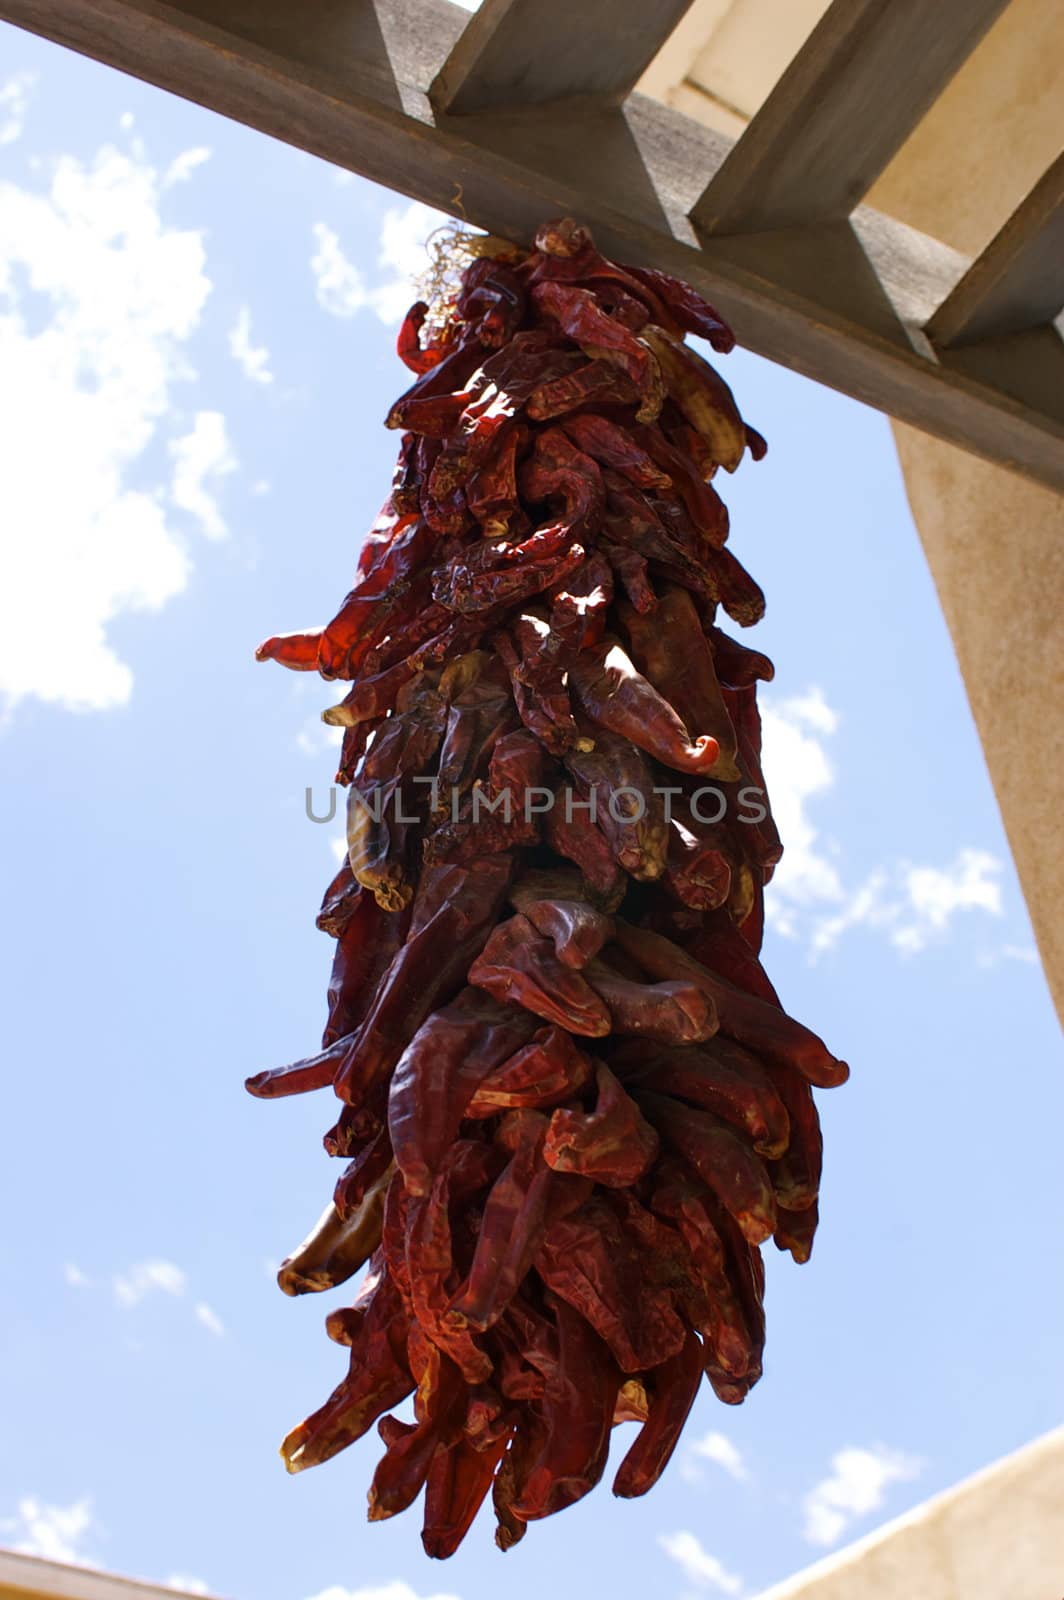 Red chili ristras against blue sky by PrincessToula